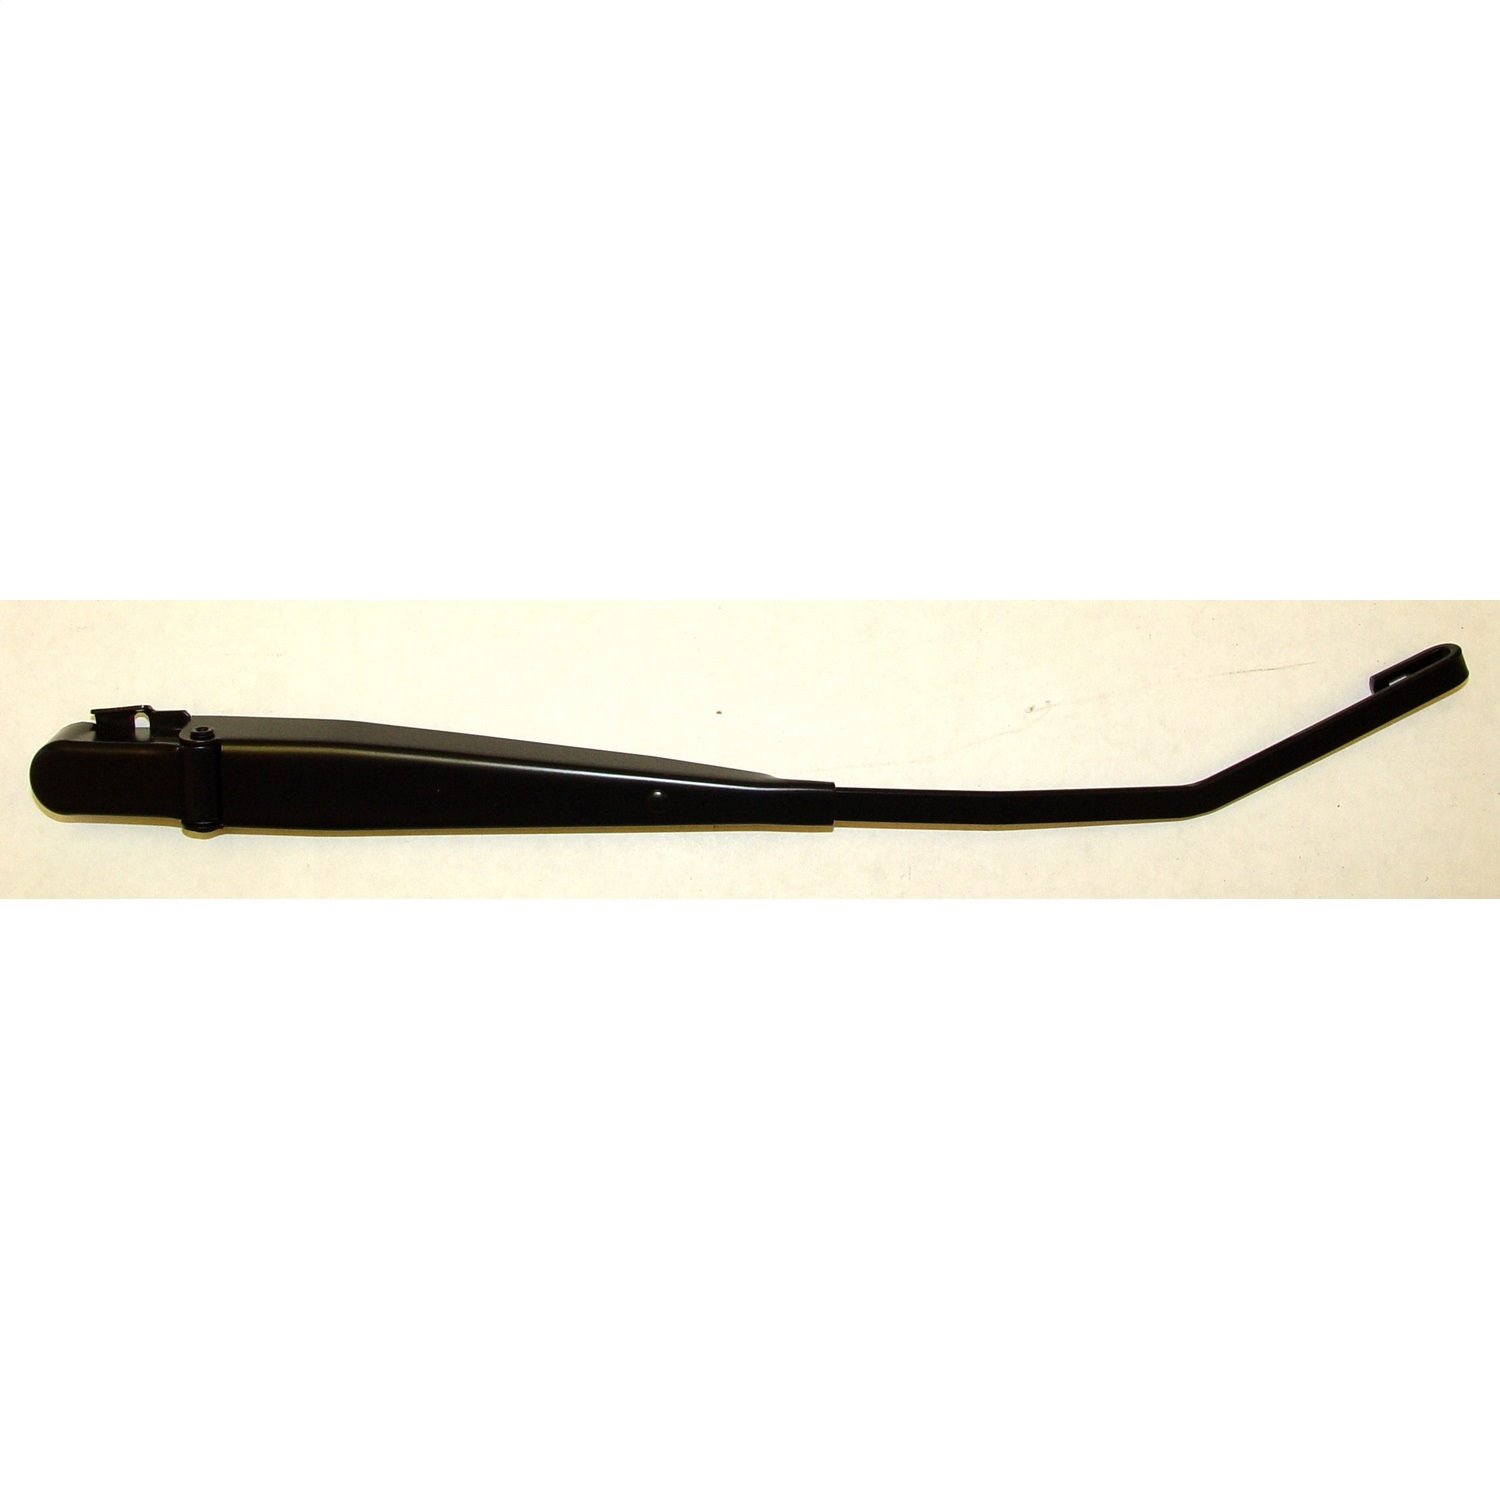 Replacement front windshield wiper arm from Omix-ADA, Fits 97-06 Jeep Wrangler, Fits left or right side.